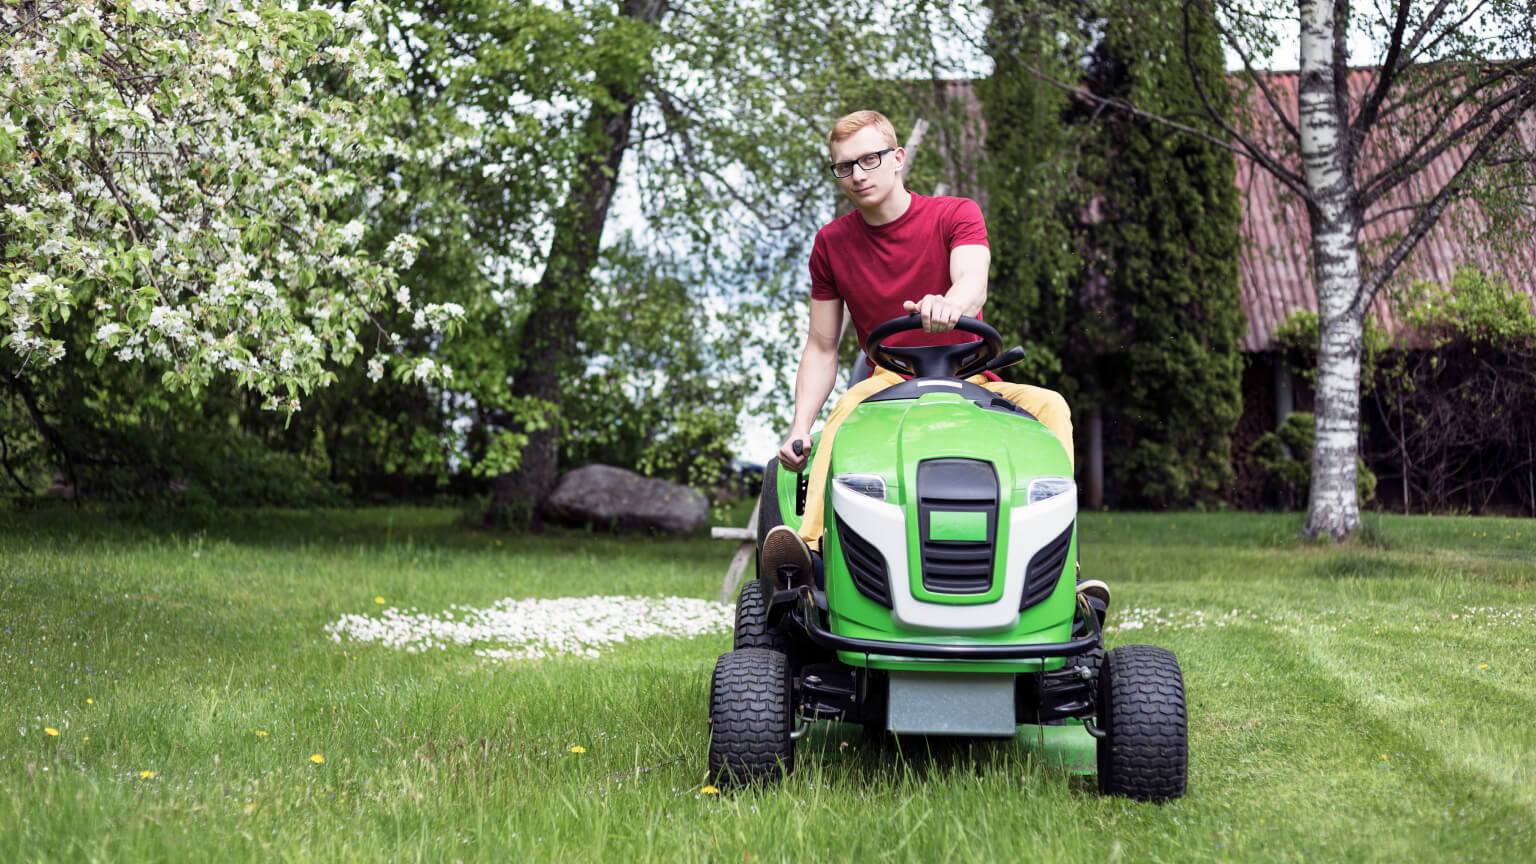 Man steering a riding lawn mower